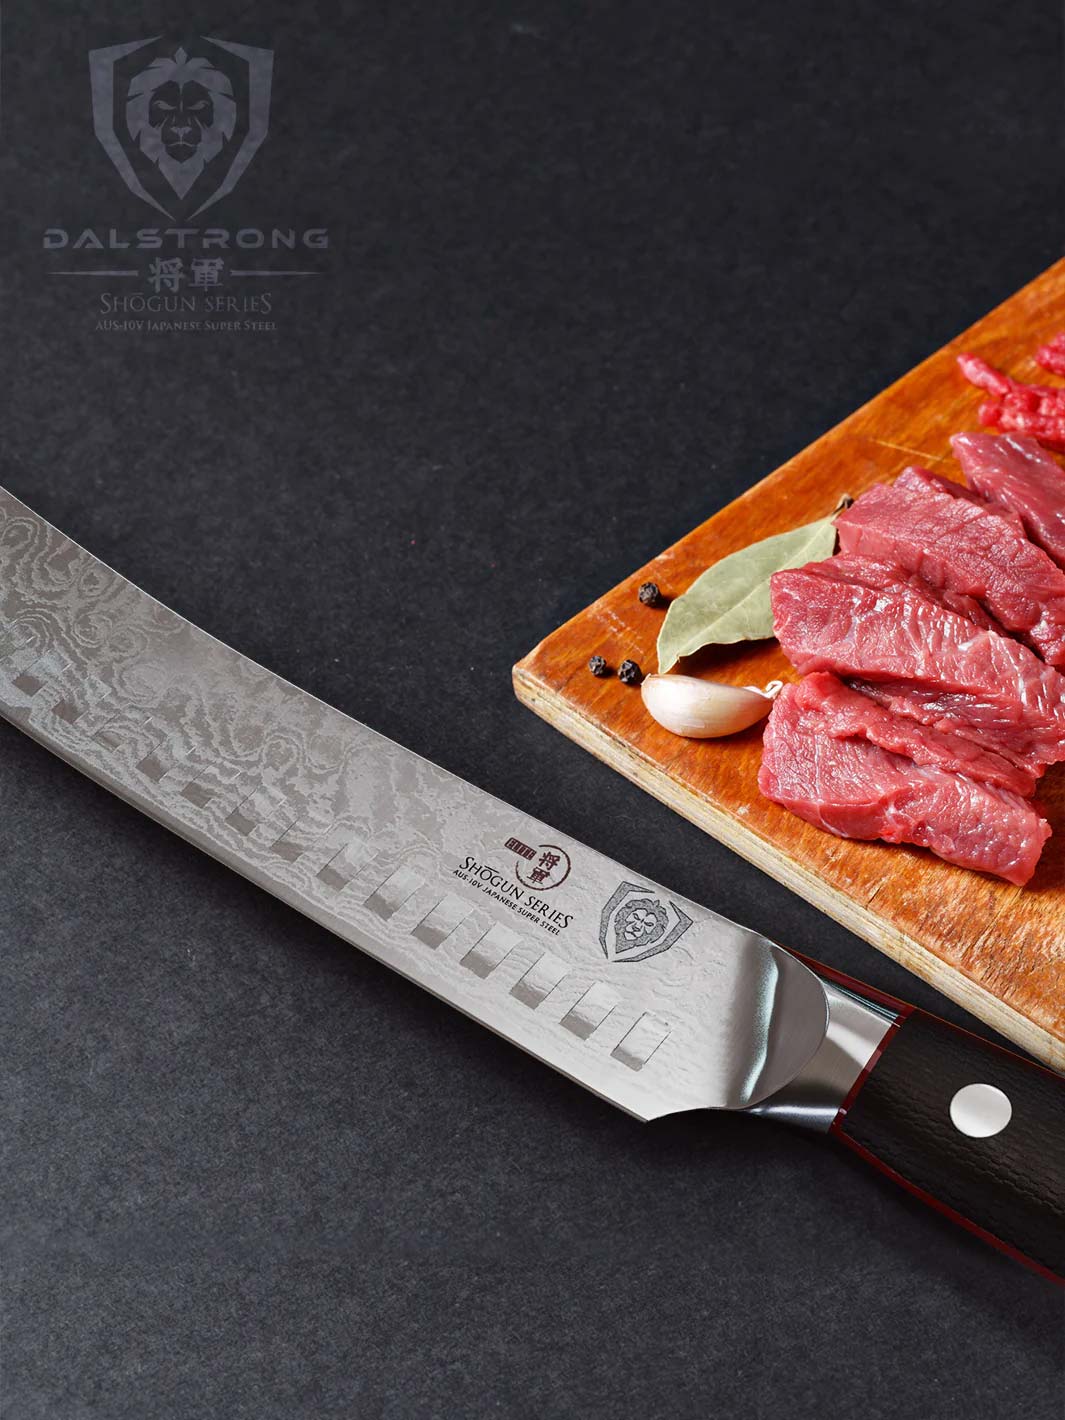 Dalstrong shogun series 8 inch butcher knife with black handle and small slices of meat on a wooden board.